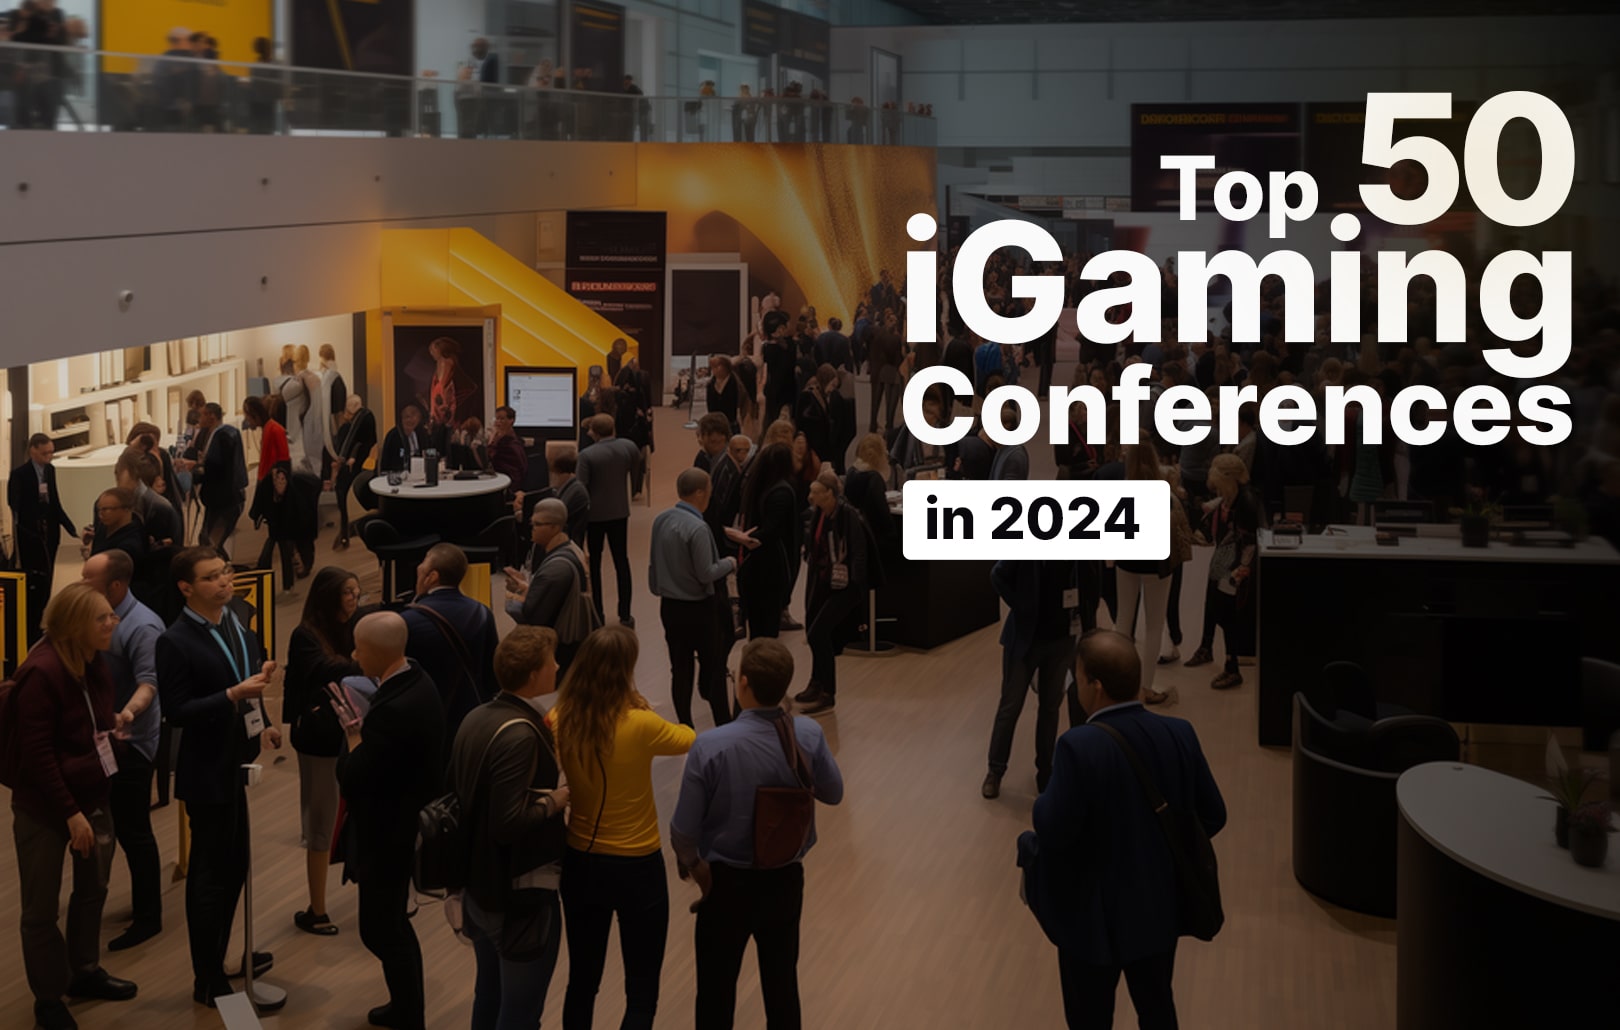 Top 50 iGaming Conferences in 2024